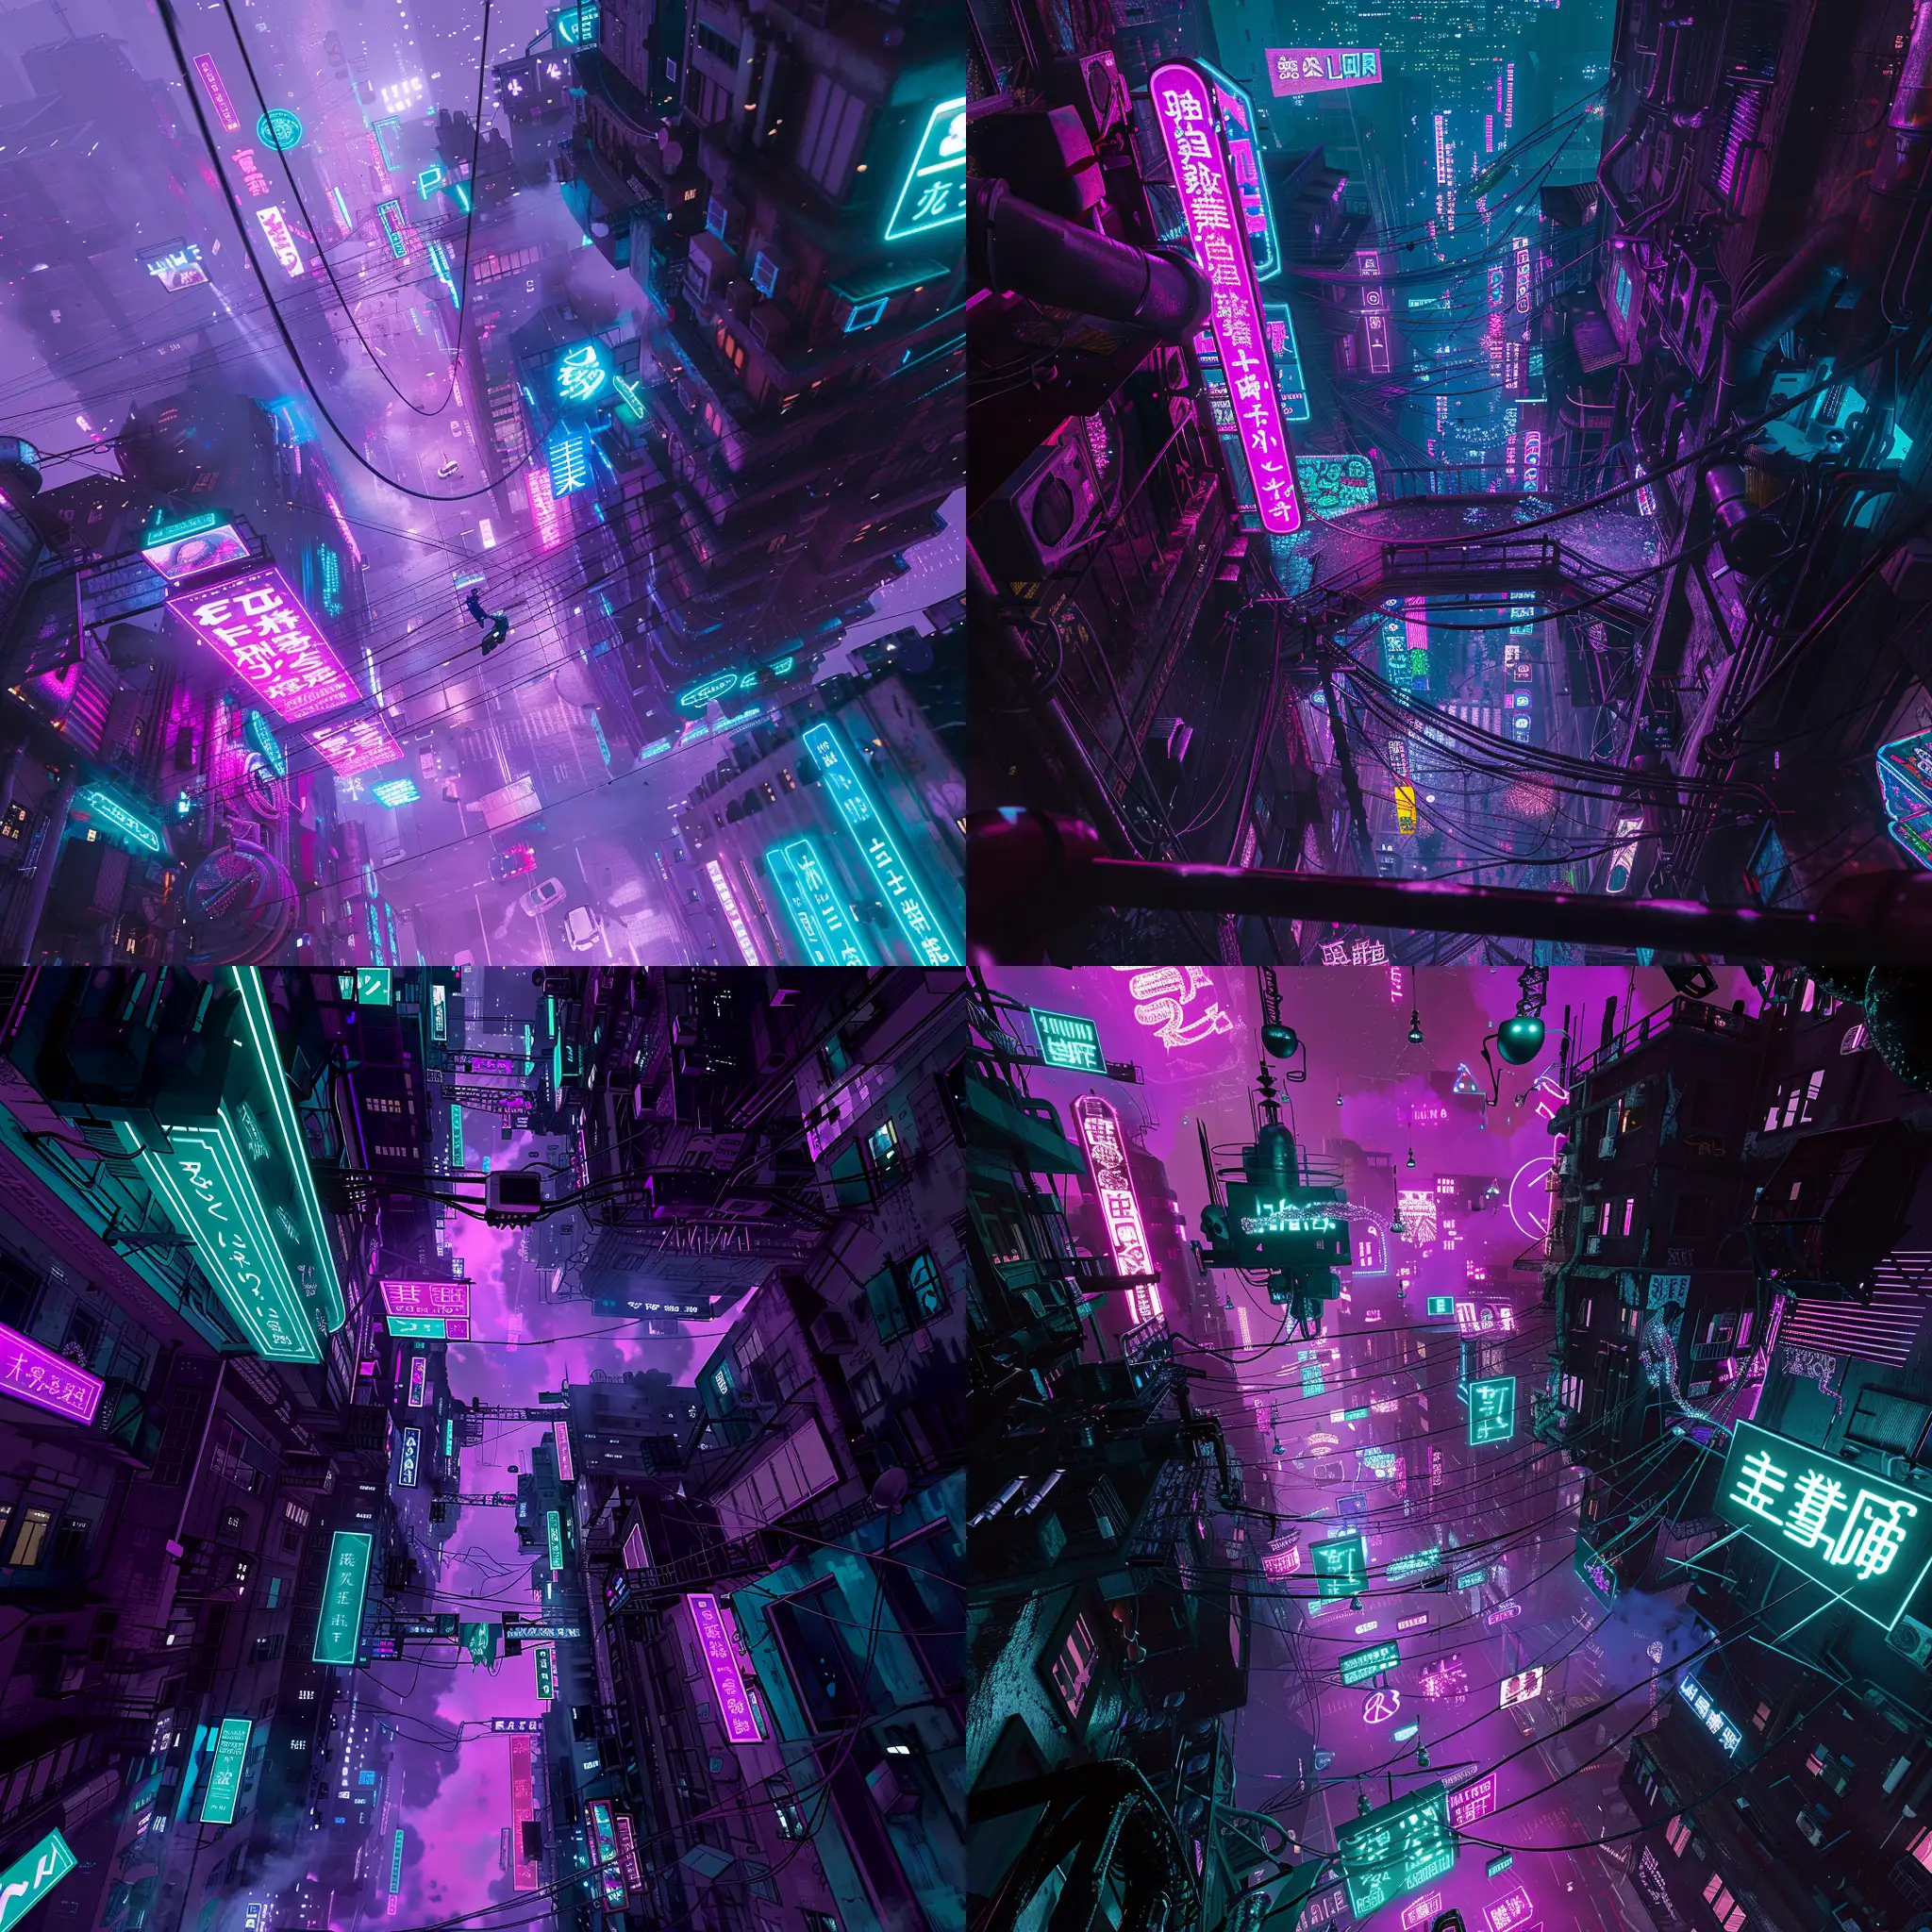 Aerial-View-of-Cyberpunk-Neotokyo-District-with-Vibrant-Neon-Lights